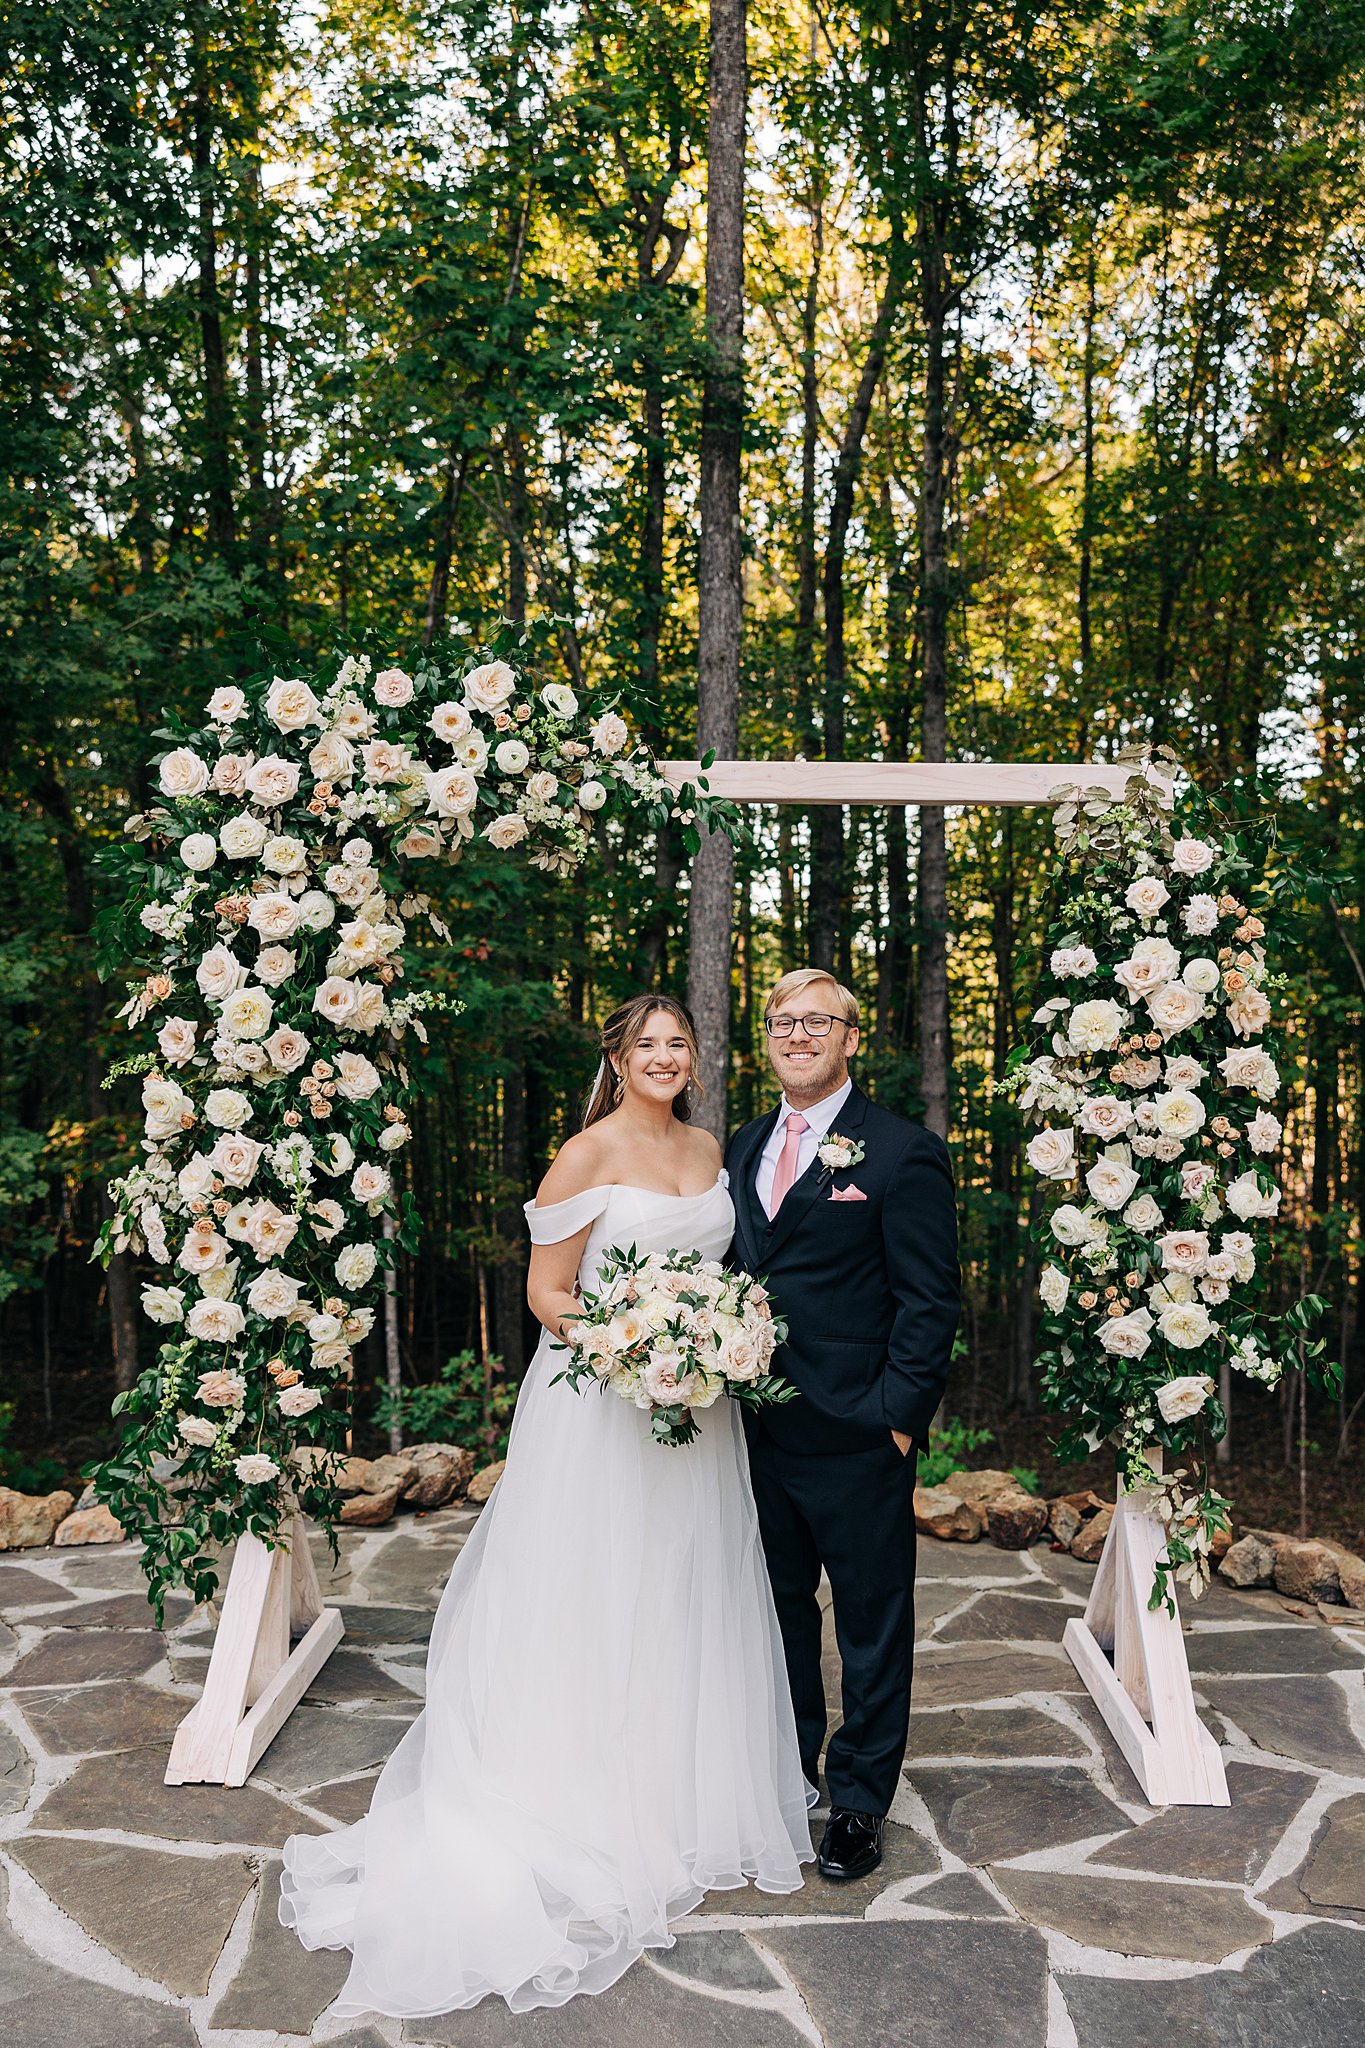 NEwlyweds stand under their carolina grove wedding venue ceremony arbor on a stone patio in the woods